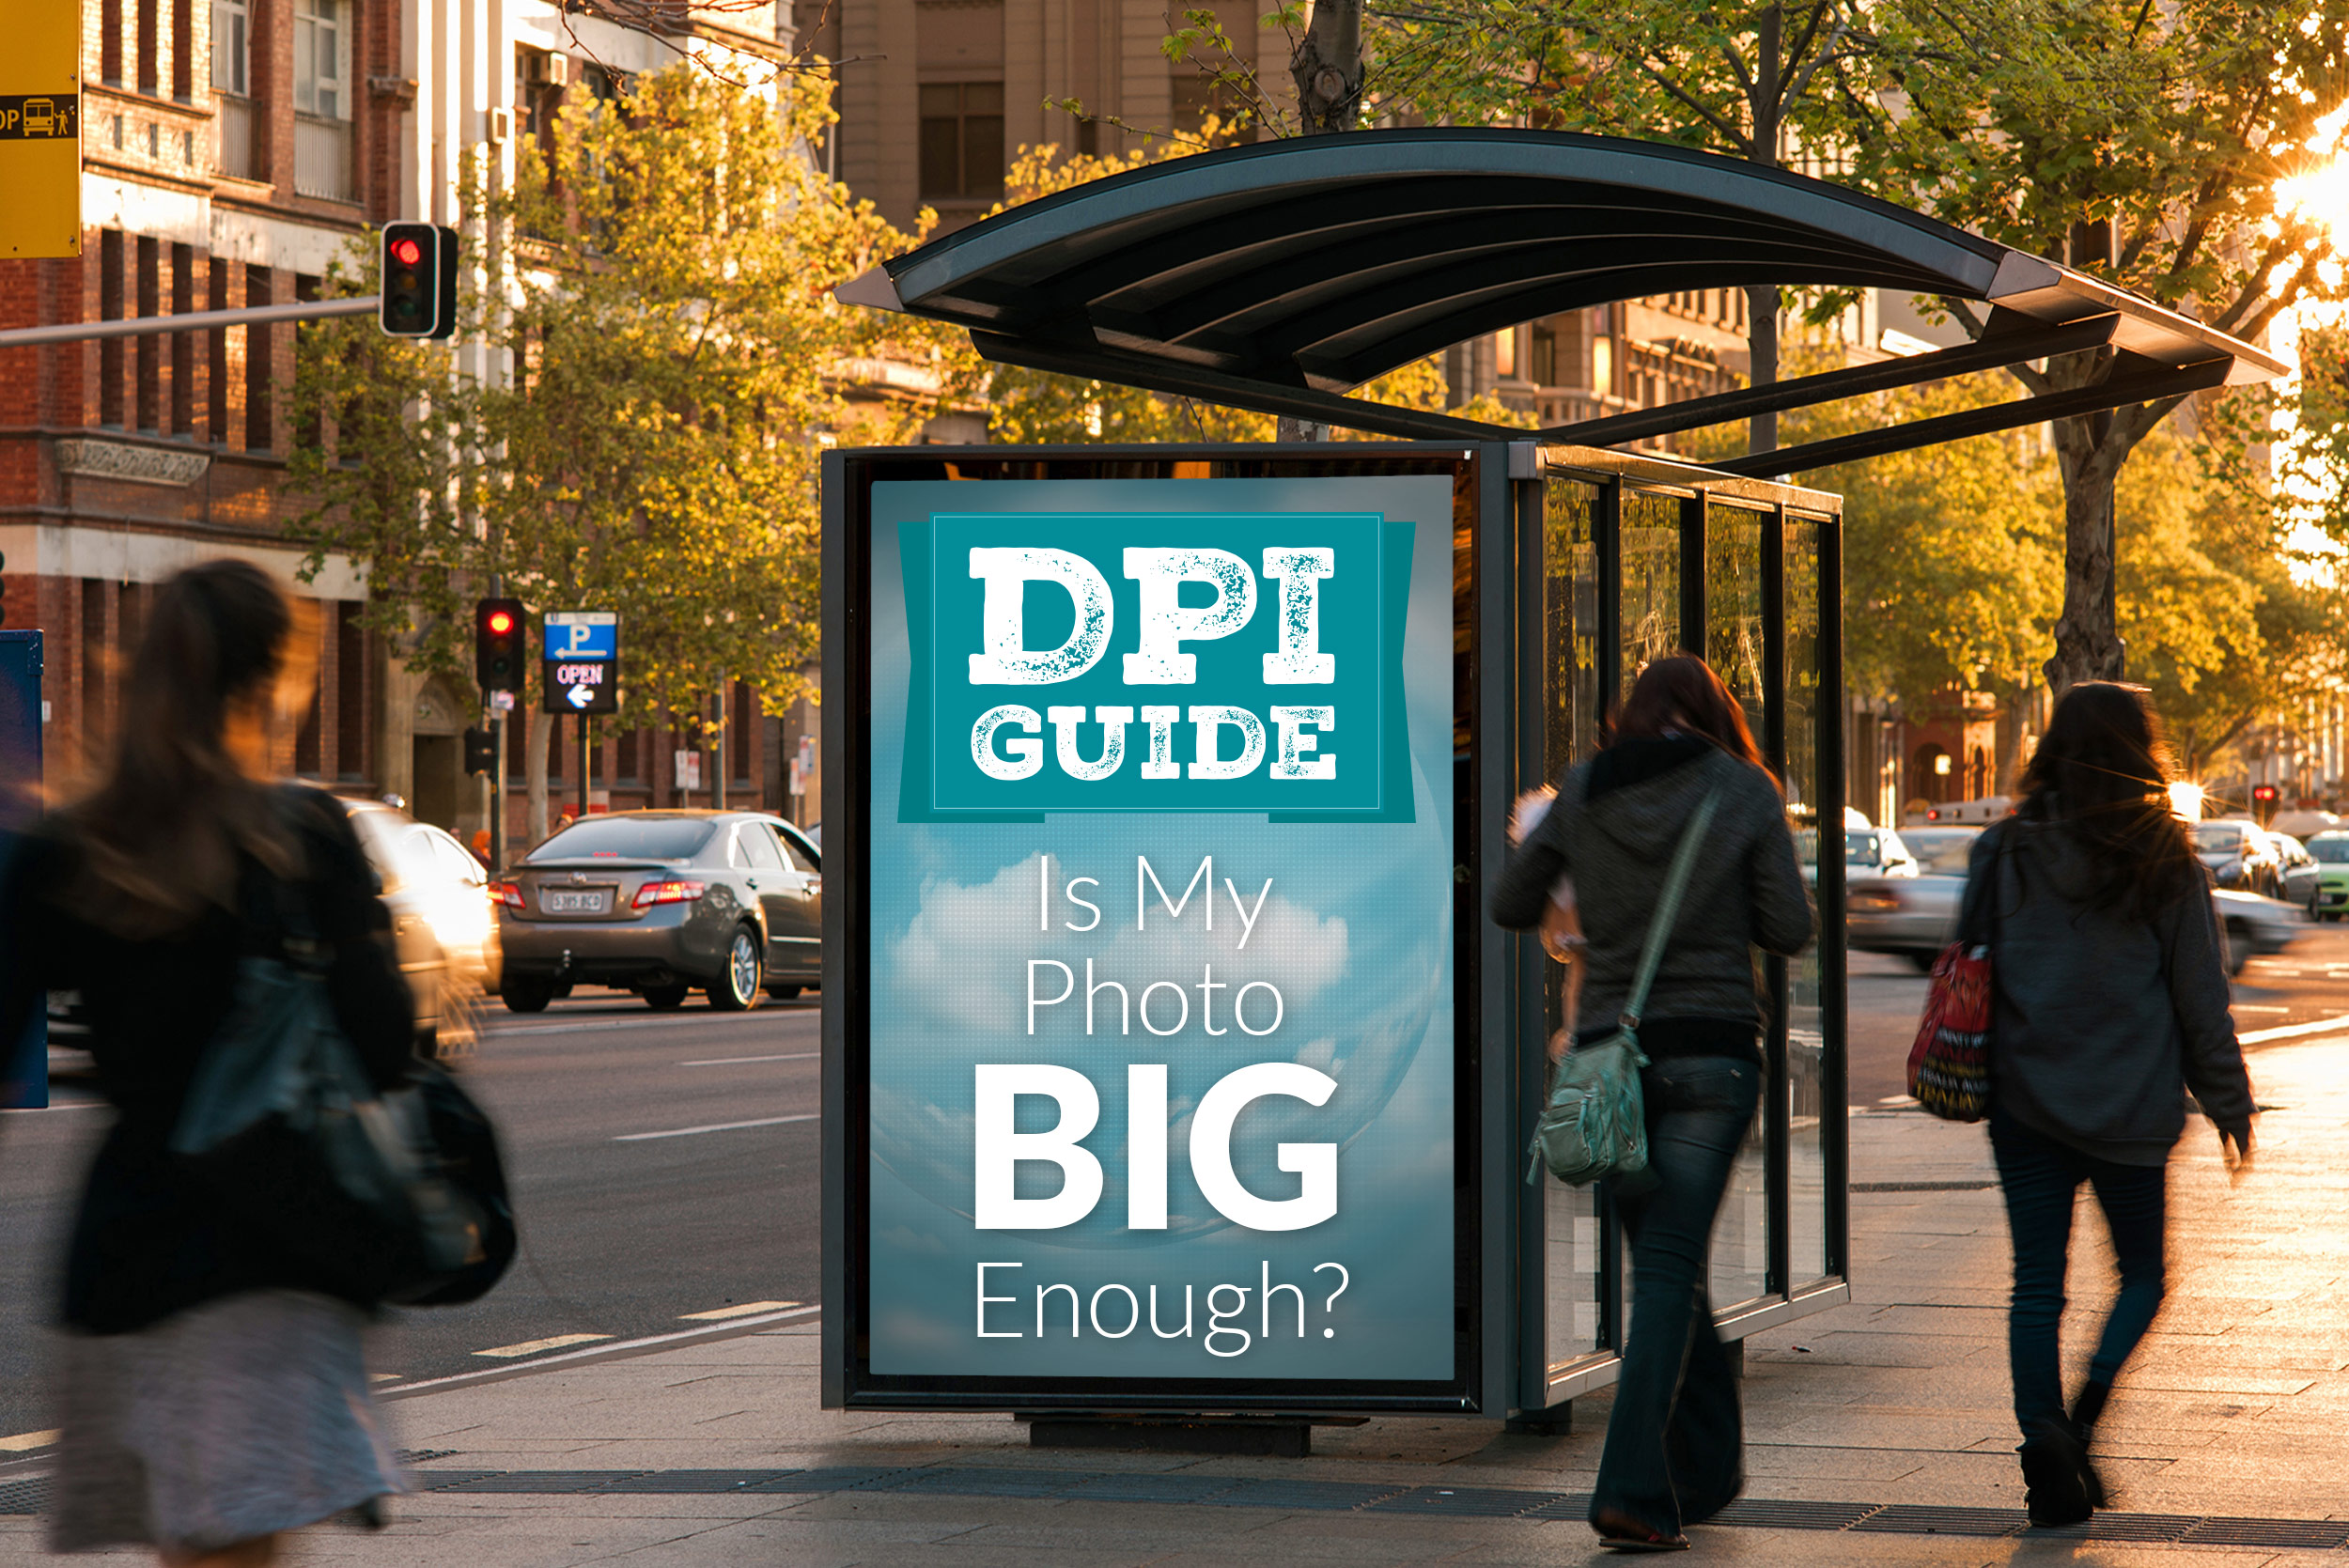 dpi guide is my photo big enough?